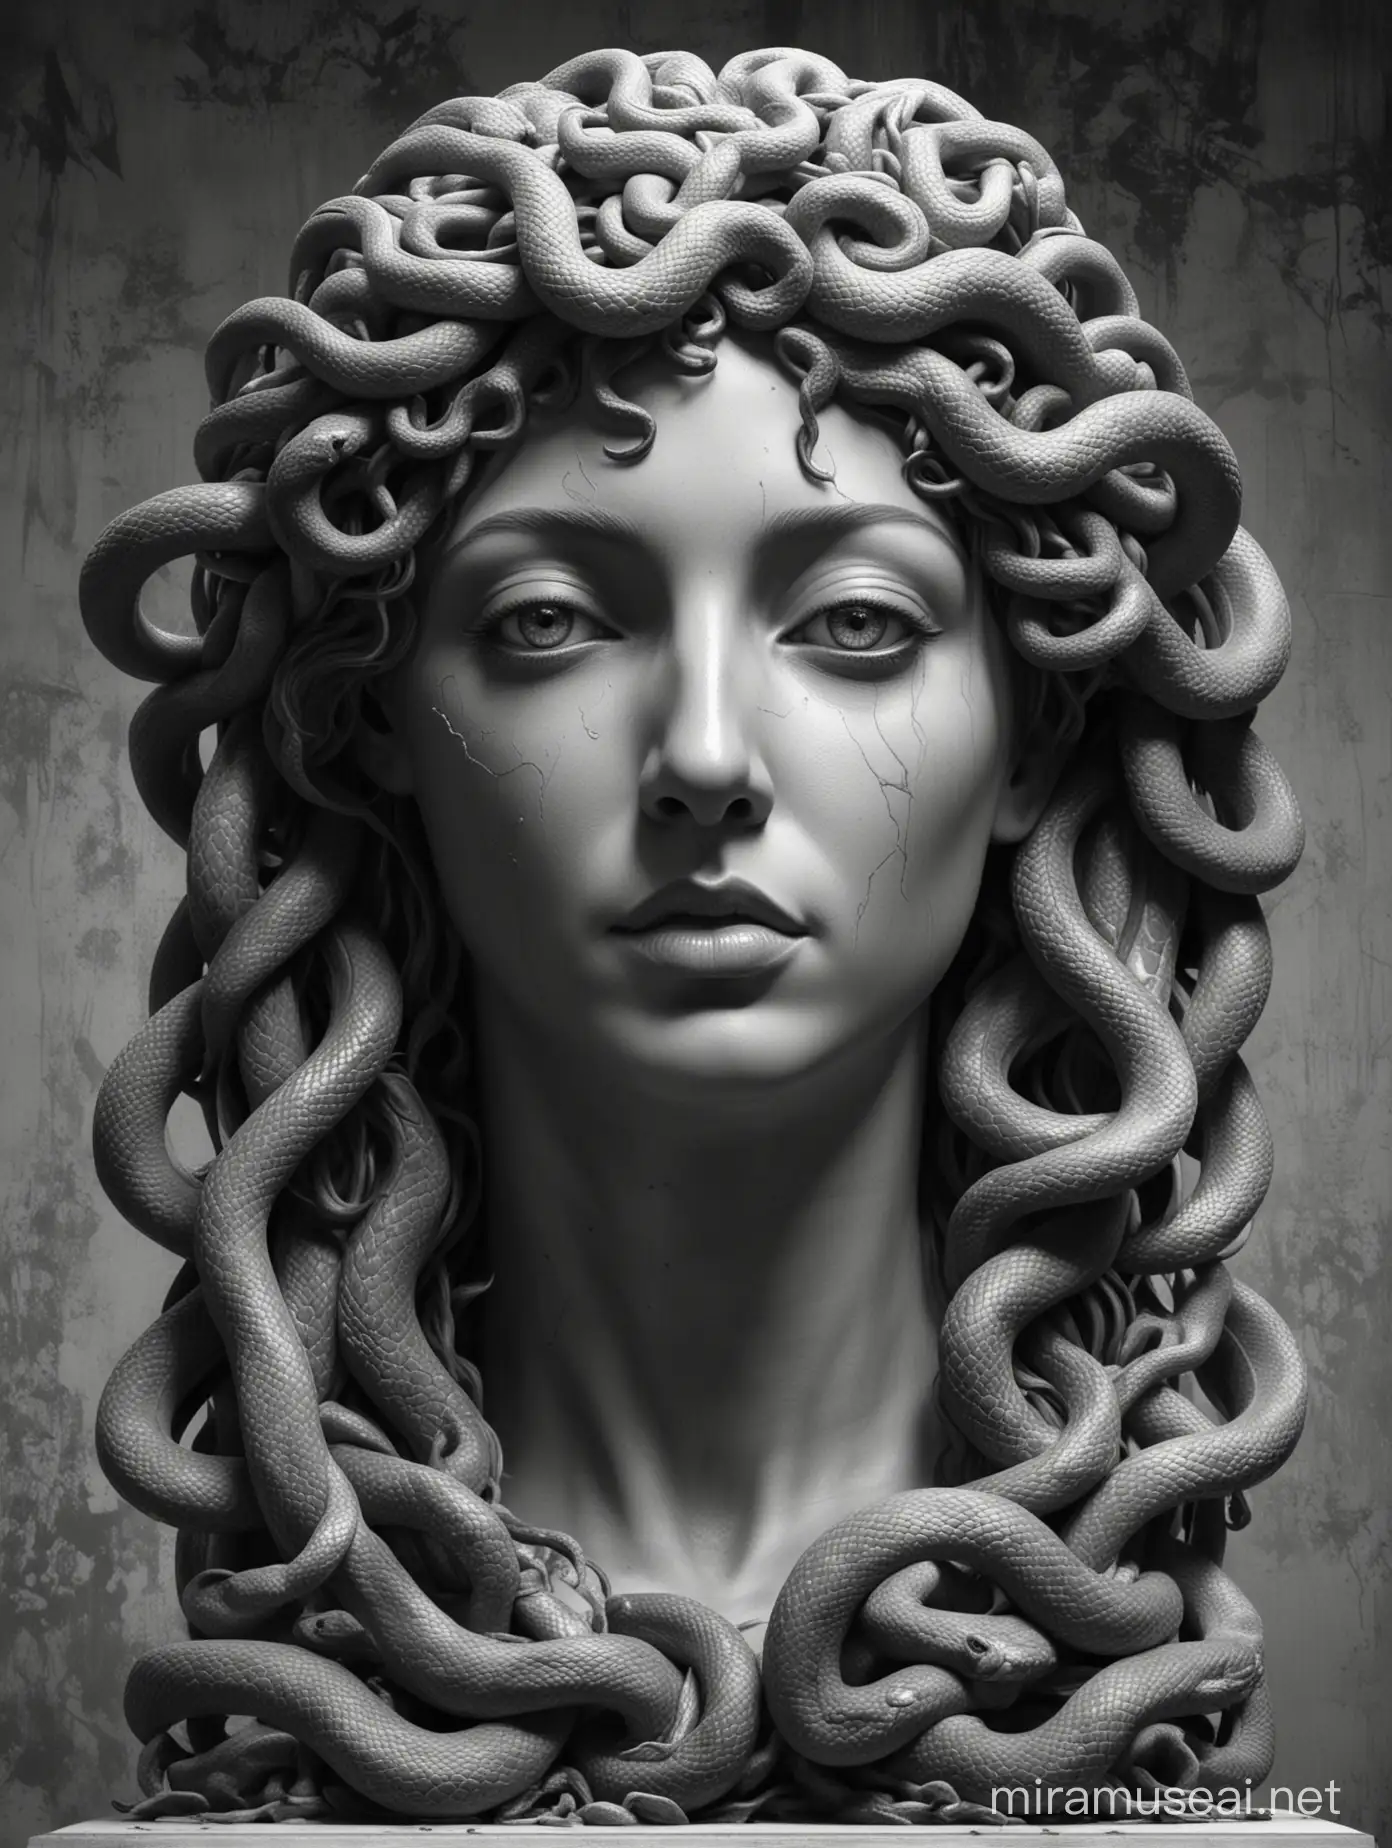 A black and white drawing of the head statue of Medusa with snakes, in front is an open letter in the style of Rob Hefferan, Artstation contest winner, polished concrete design, official game artwork, cartooncore